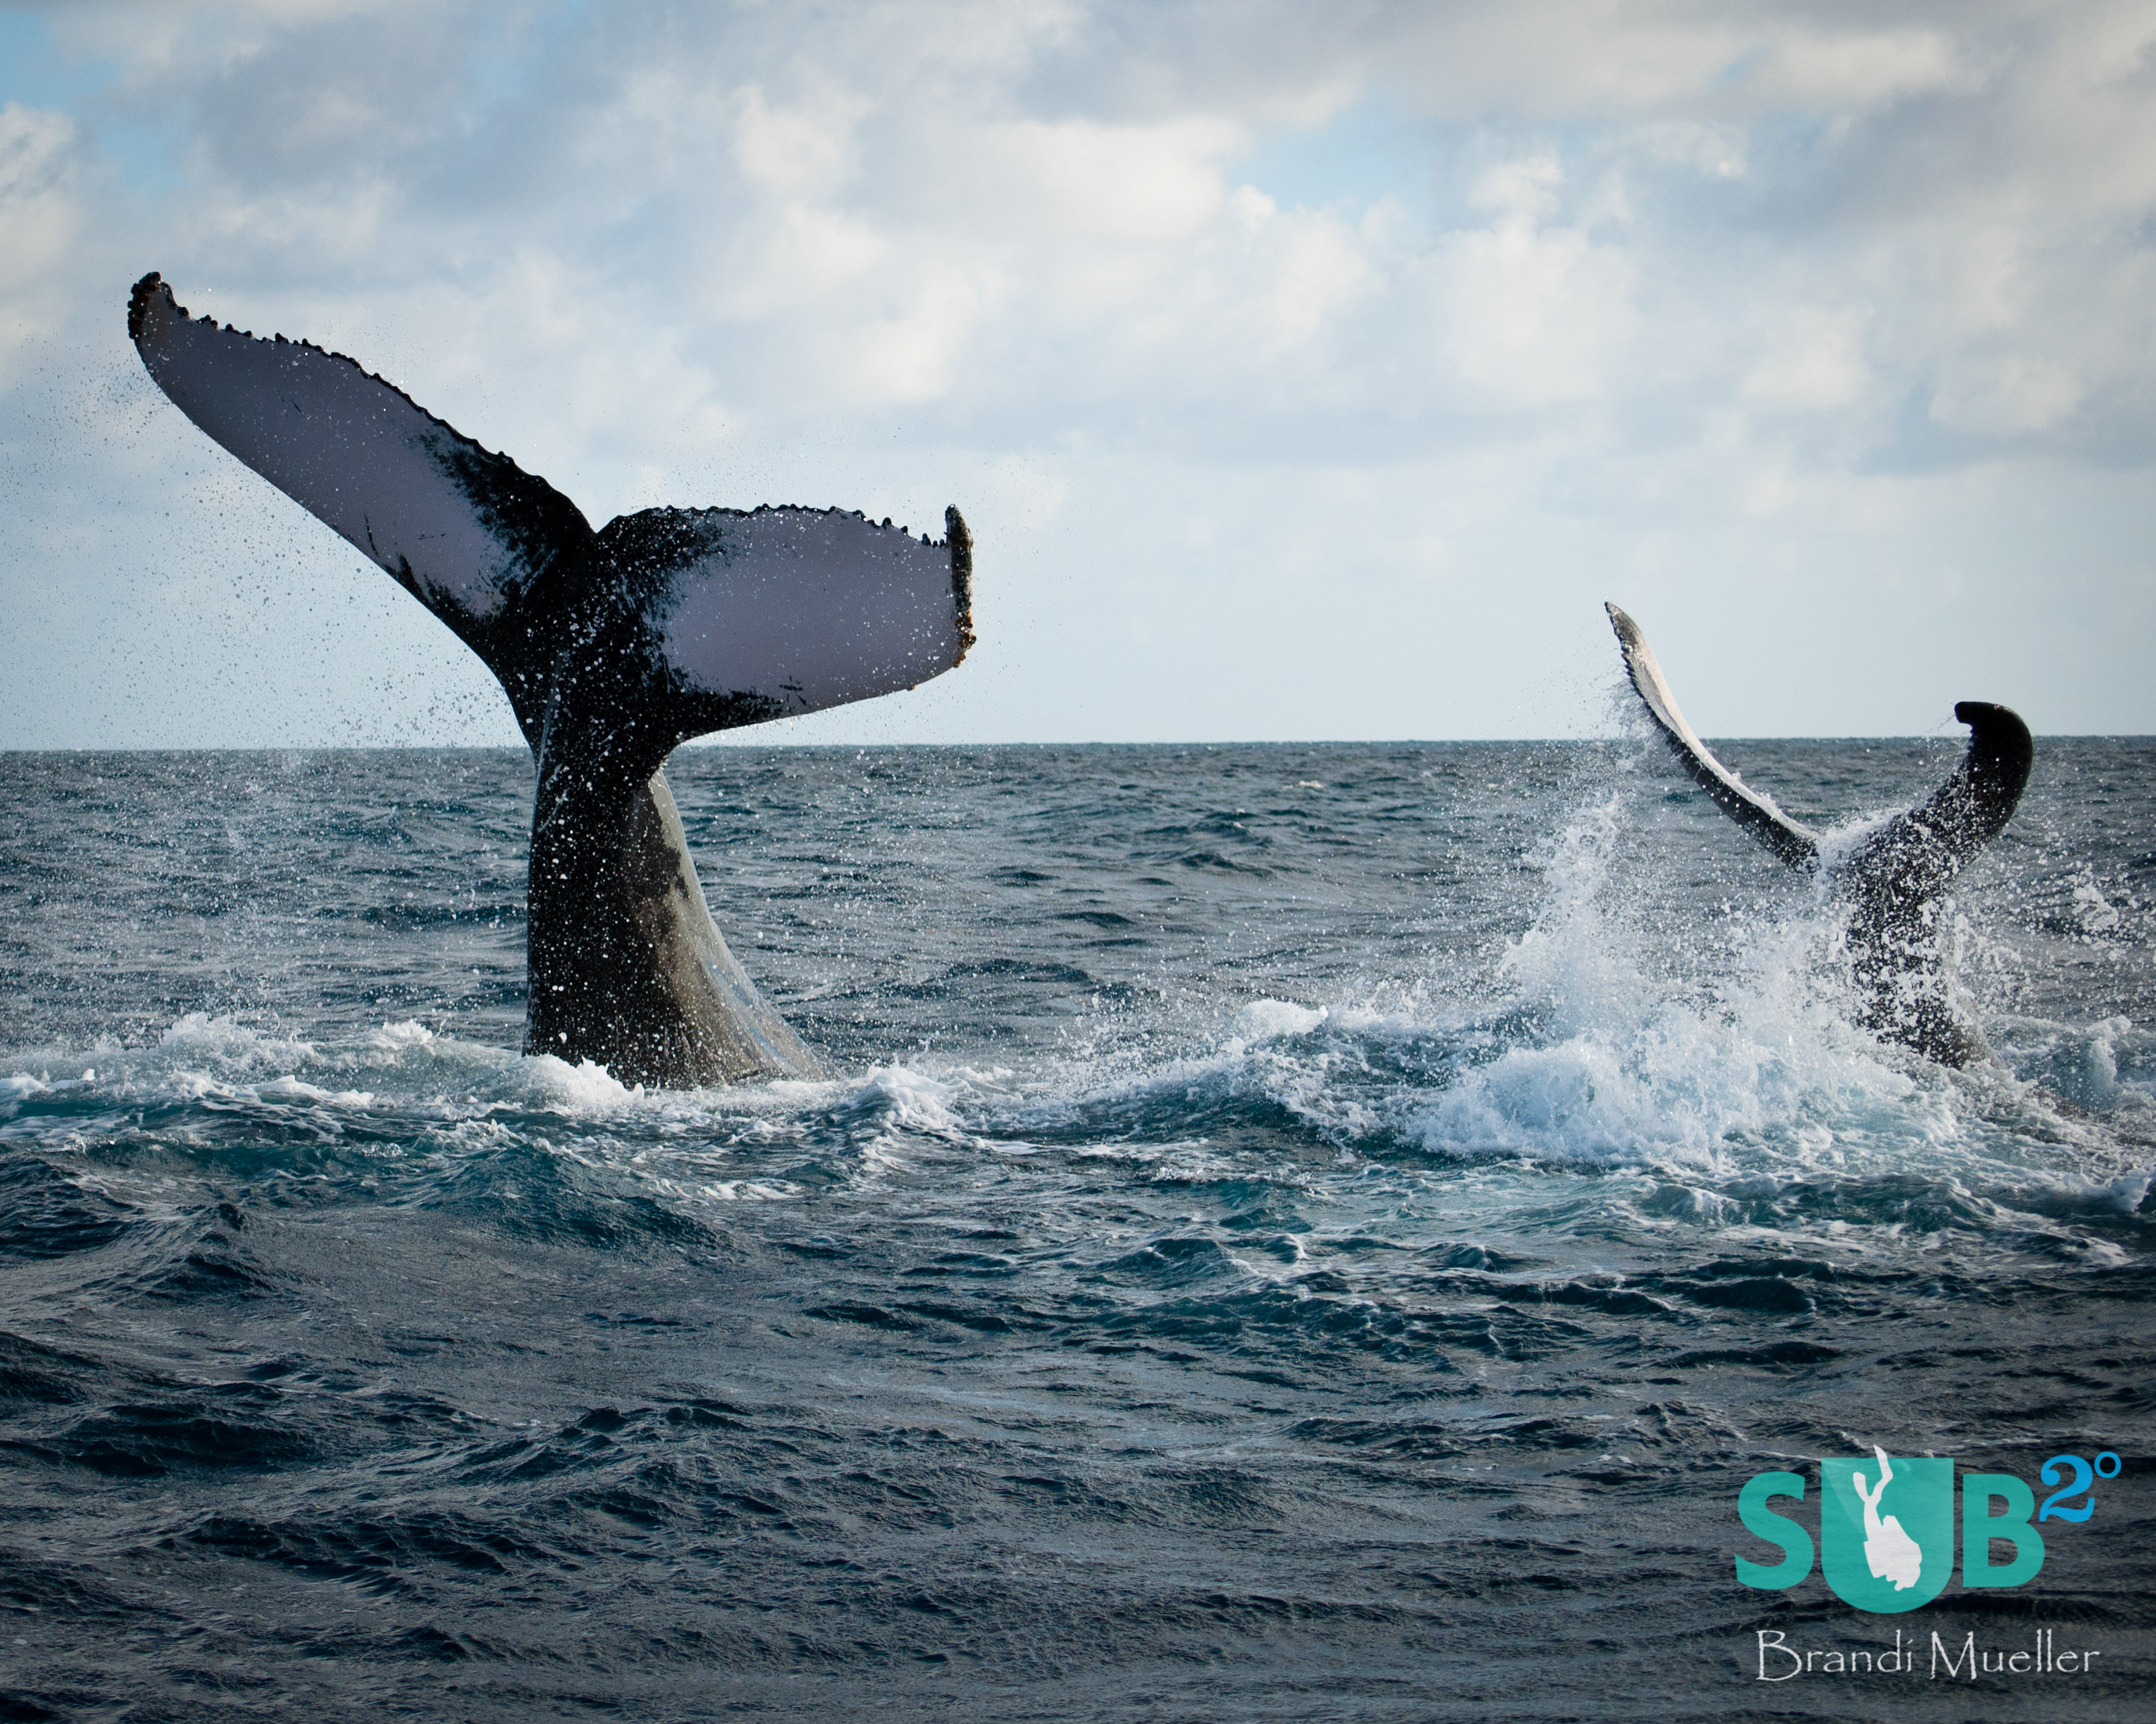 A mother humpback whale shows her calf how to tail slap and the calf practices alongside.